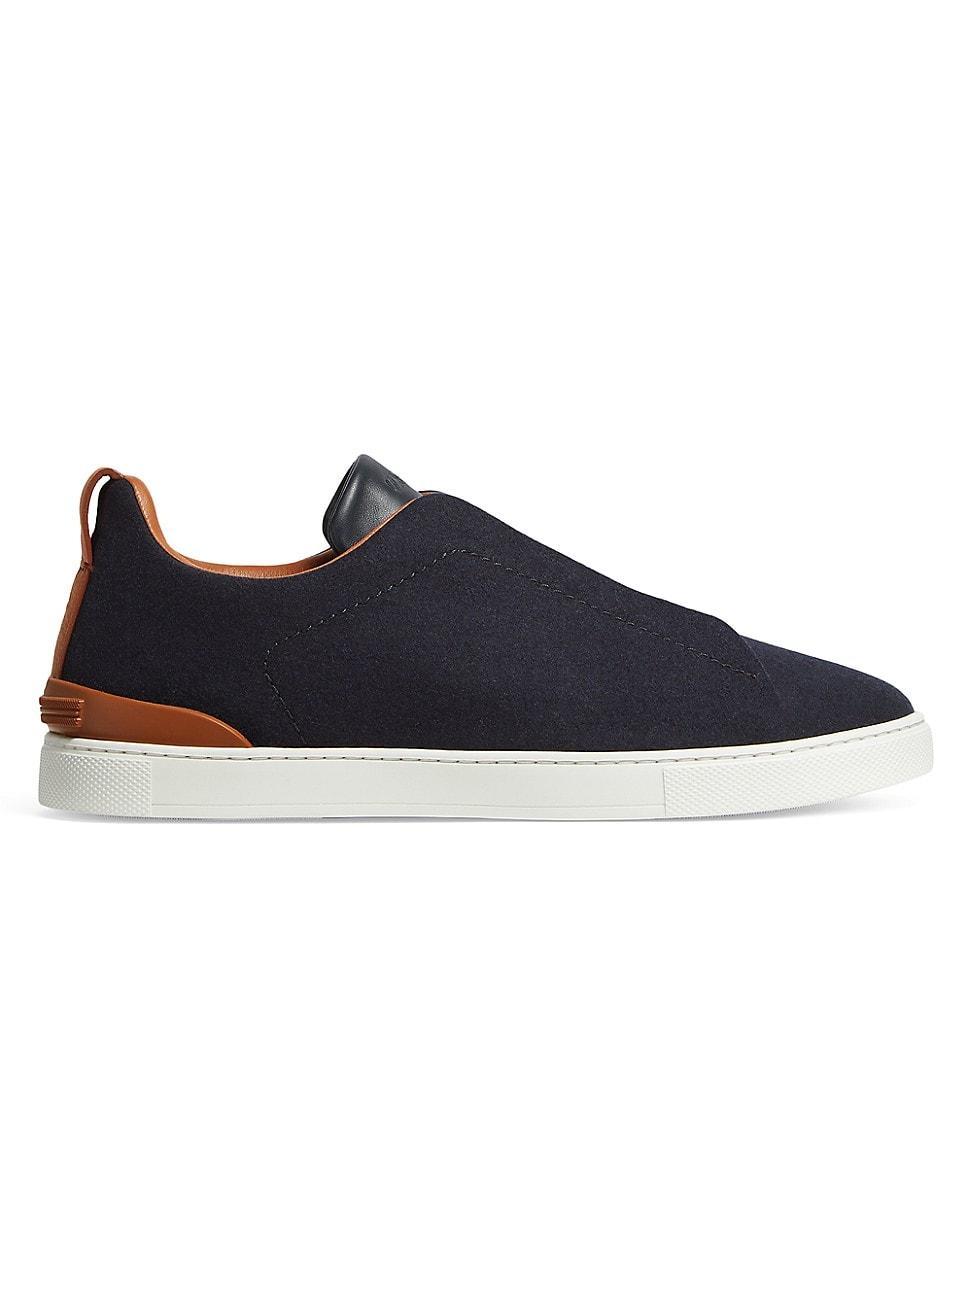 Mens Triple Stitch Low-Top Sneakers Product Image